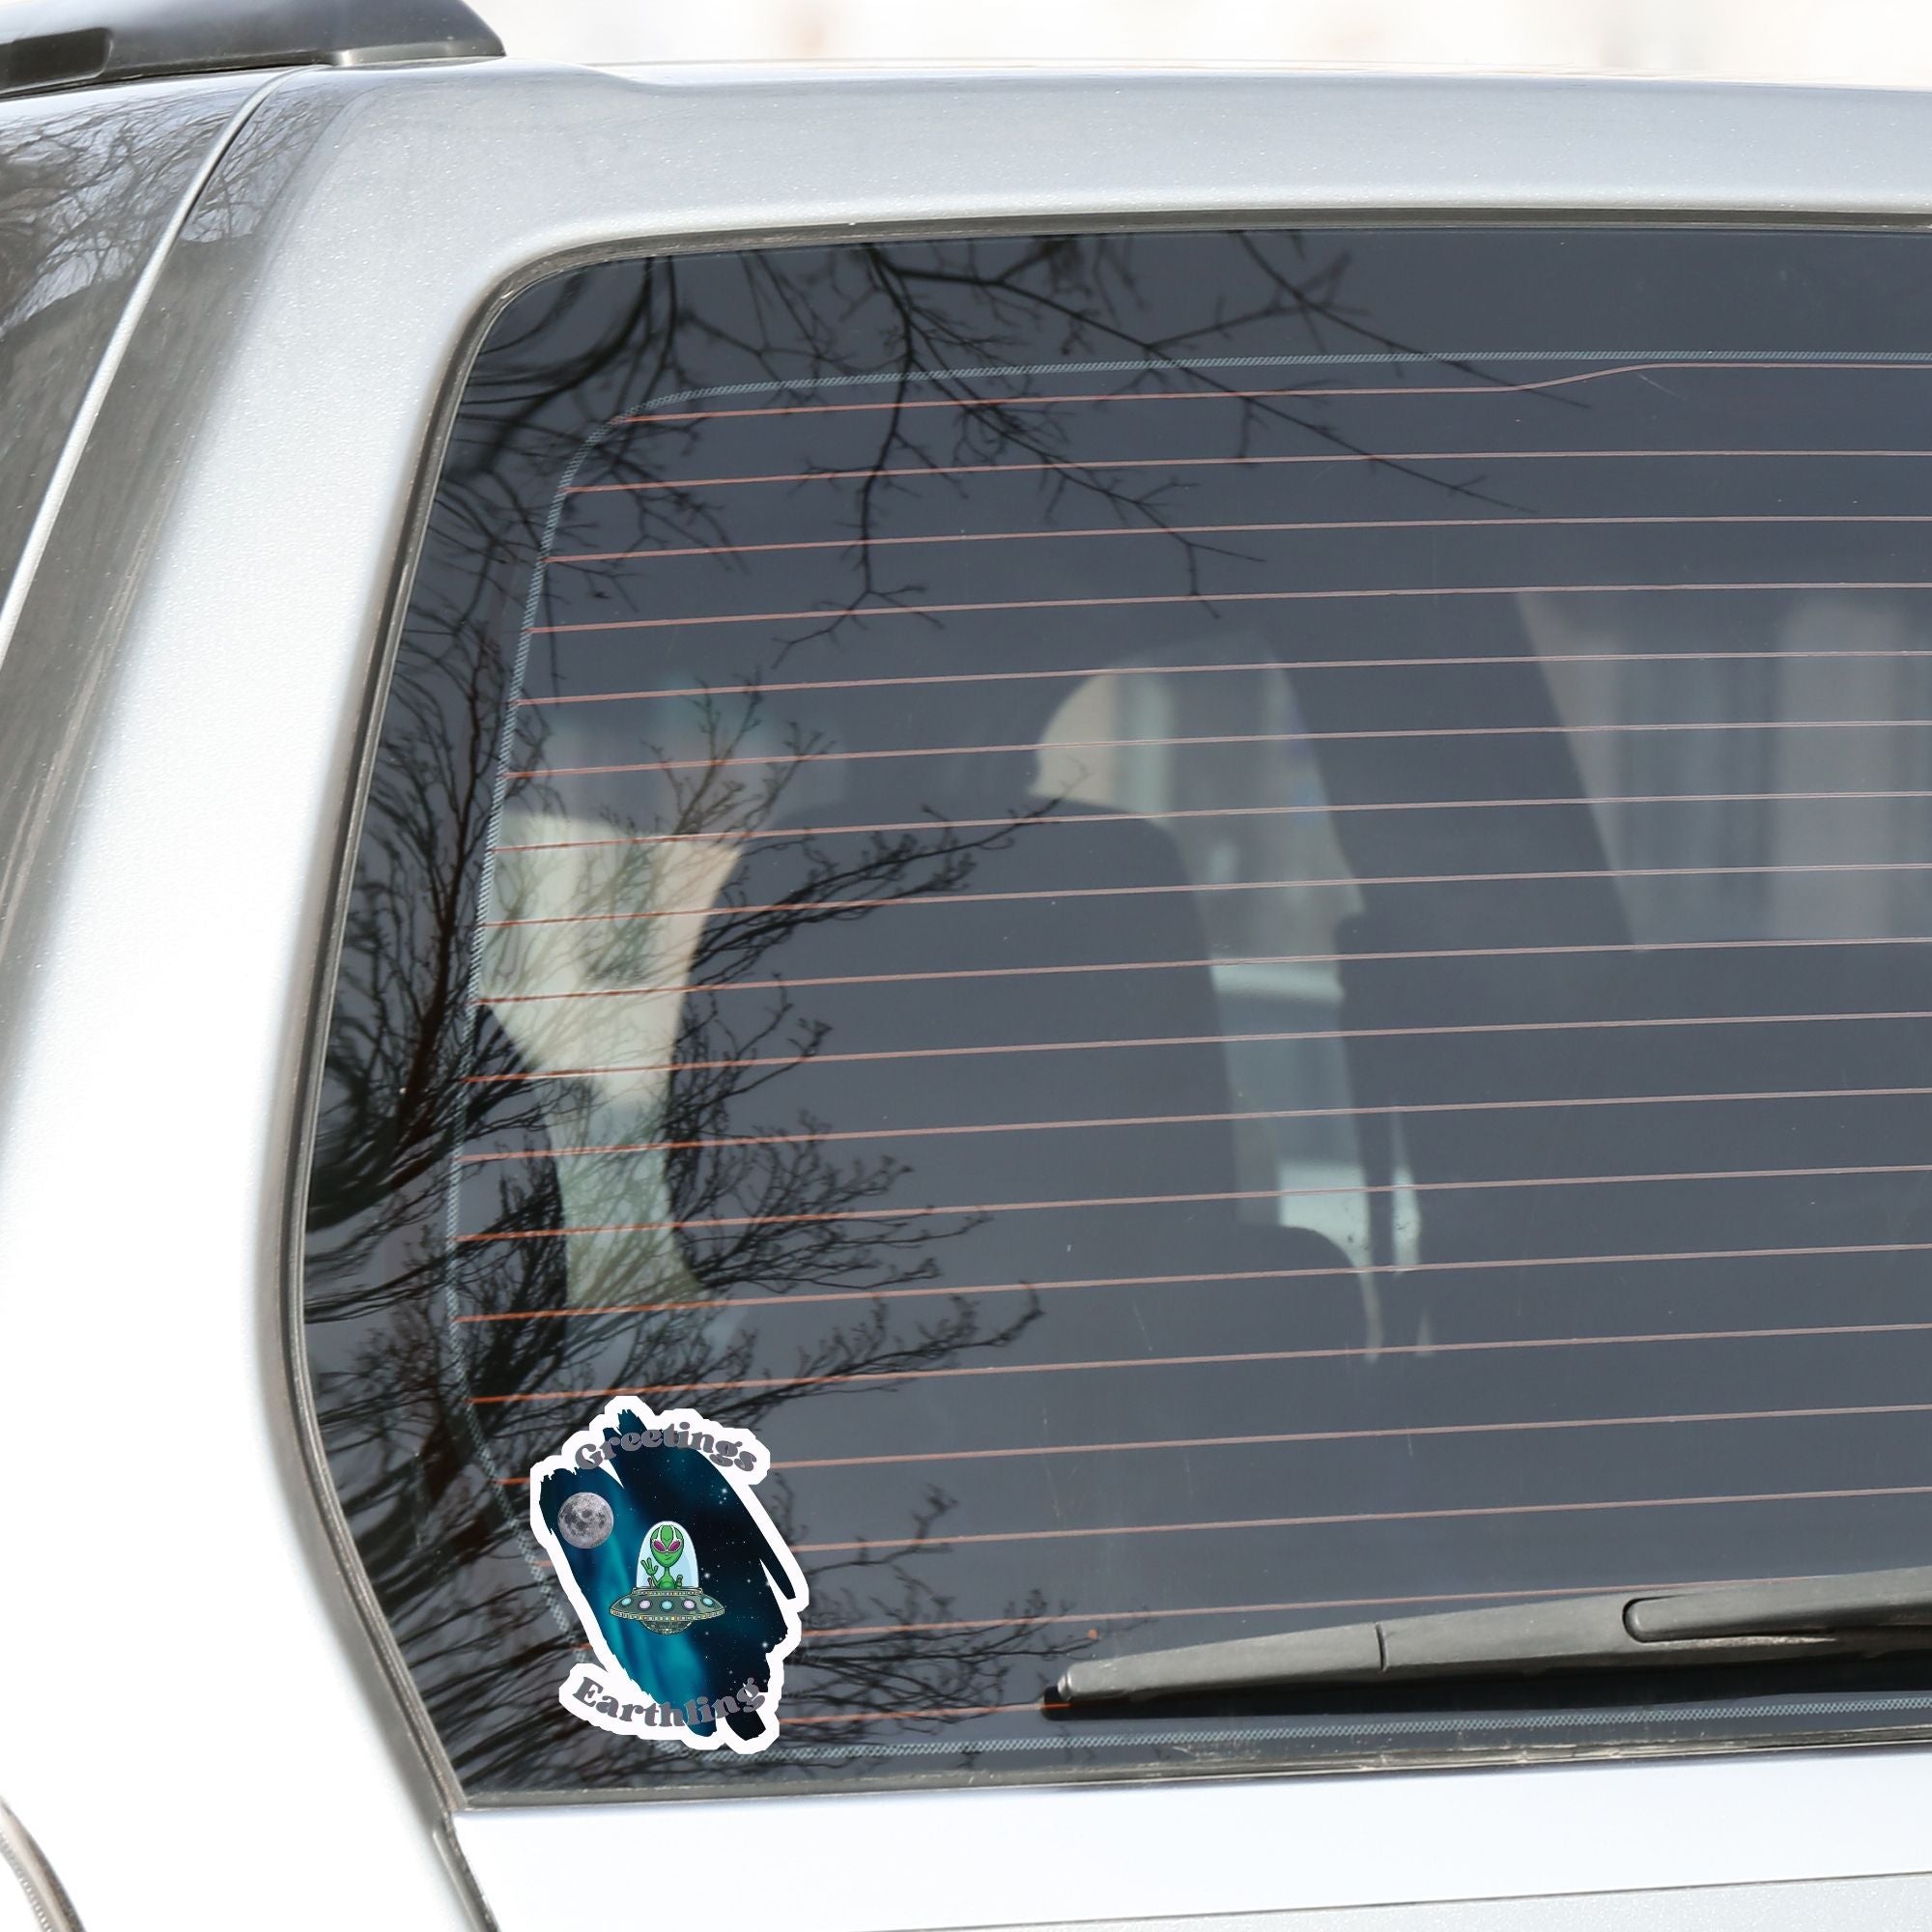 Welcome space aliens! This individual die-cut sticker features a friendly green space alien in a flying saucer, on a background of stars with the moon behind, and the words "Greetings Earthling". This image shows the flying saucer sticker on the rear window of a car.